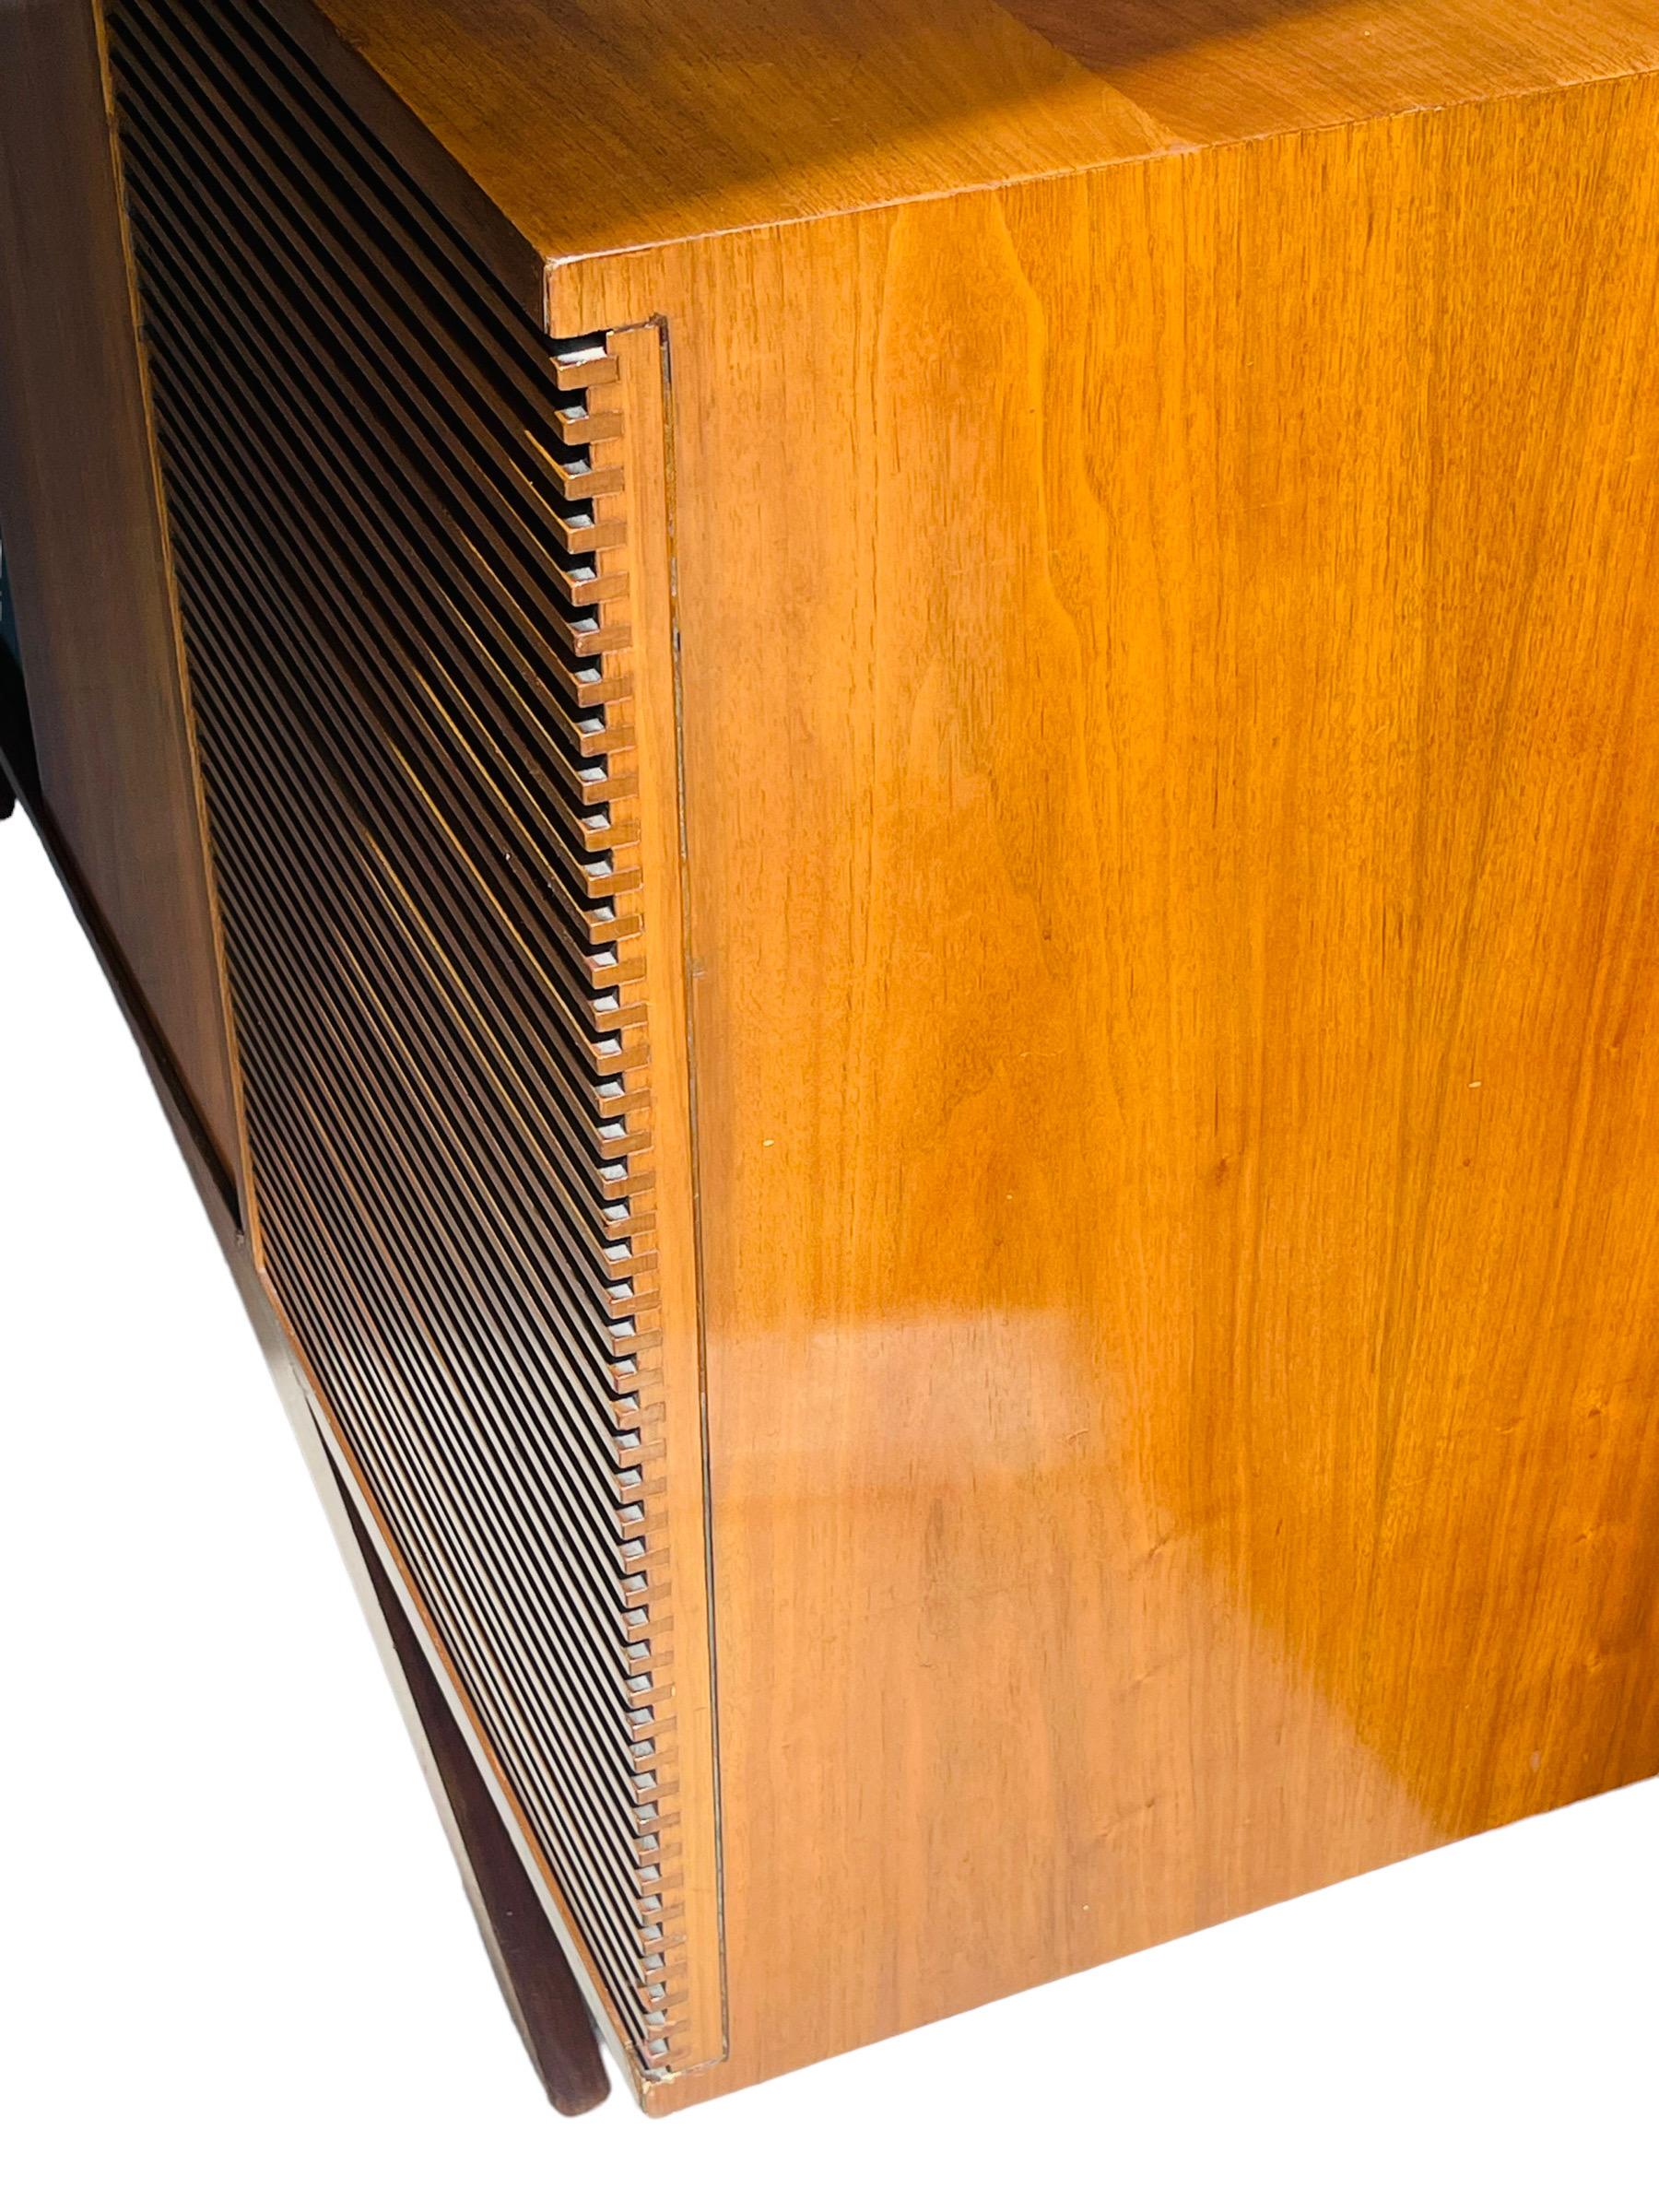 Rare Sculptural Credenza / Stereo Cabinet in Walnut in Manner of Vladimir Kagan For Sale 4